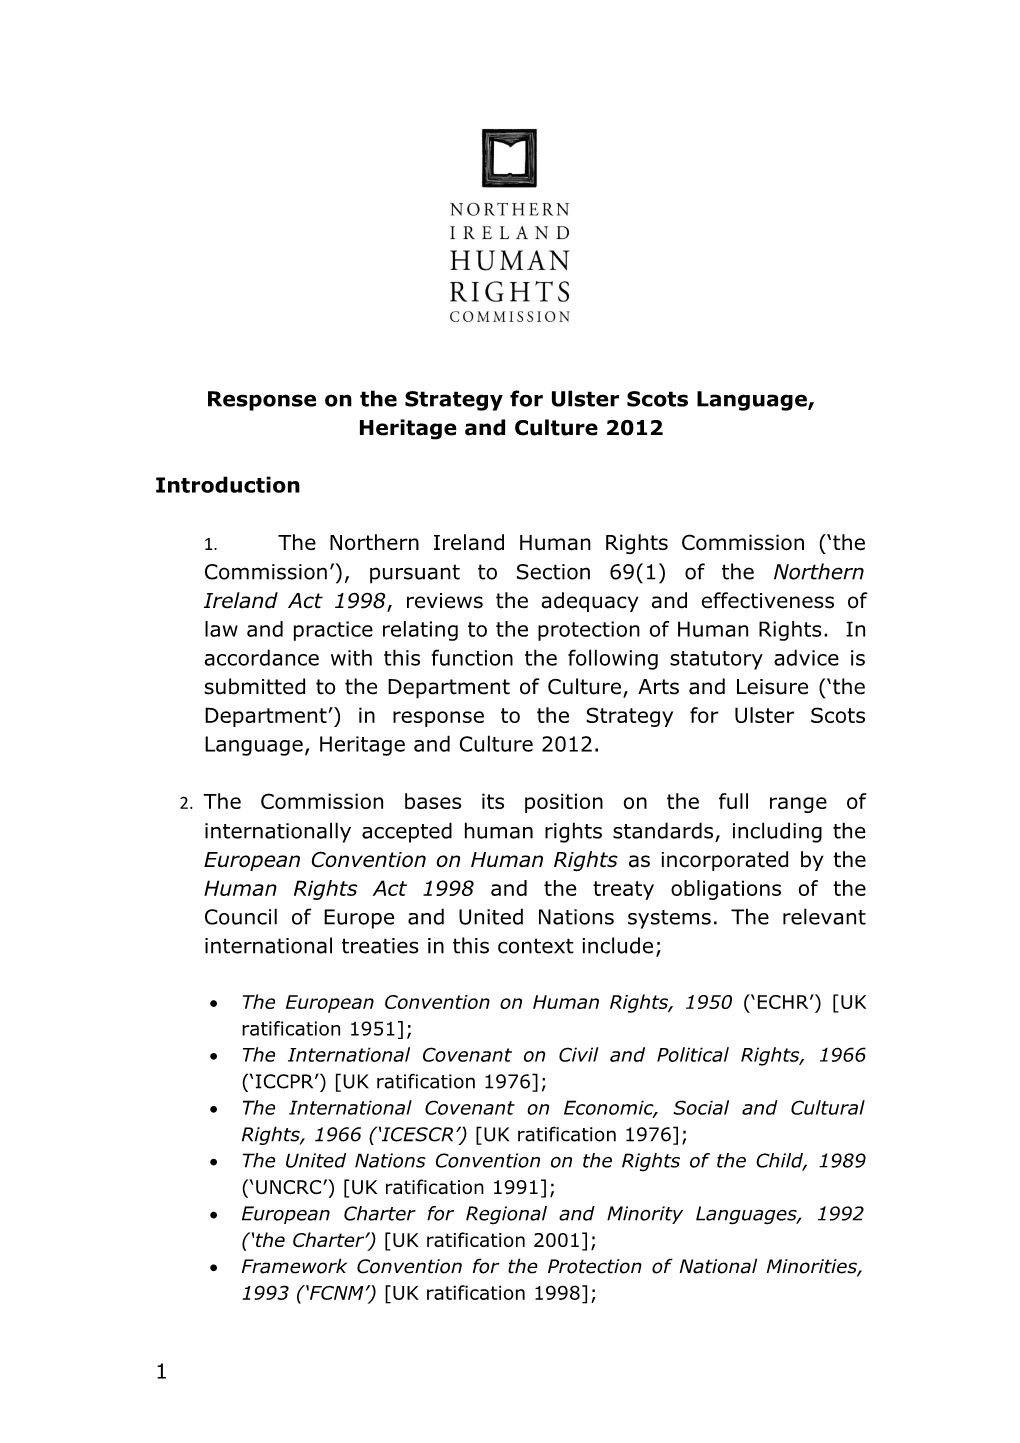 Response on the Strategy for Ulster Scots Language, Heritage and Culture 2012